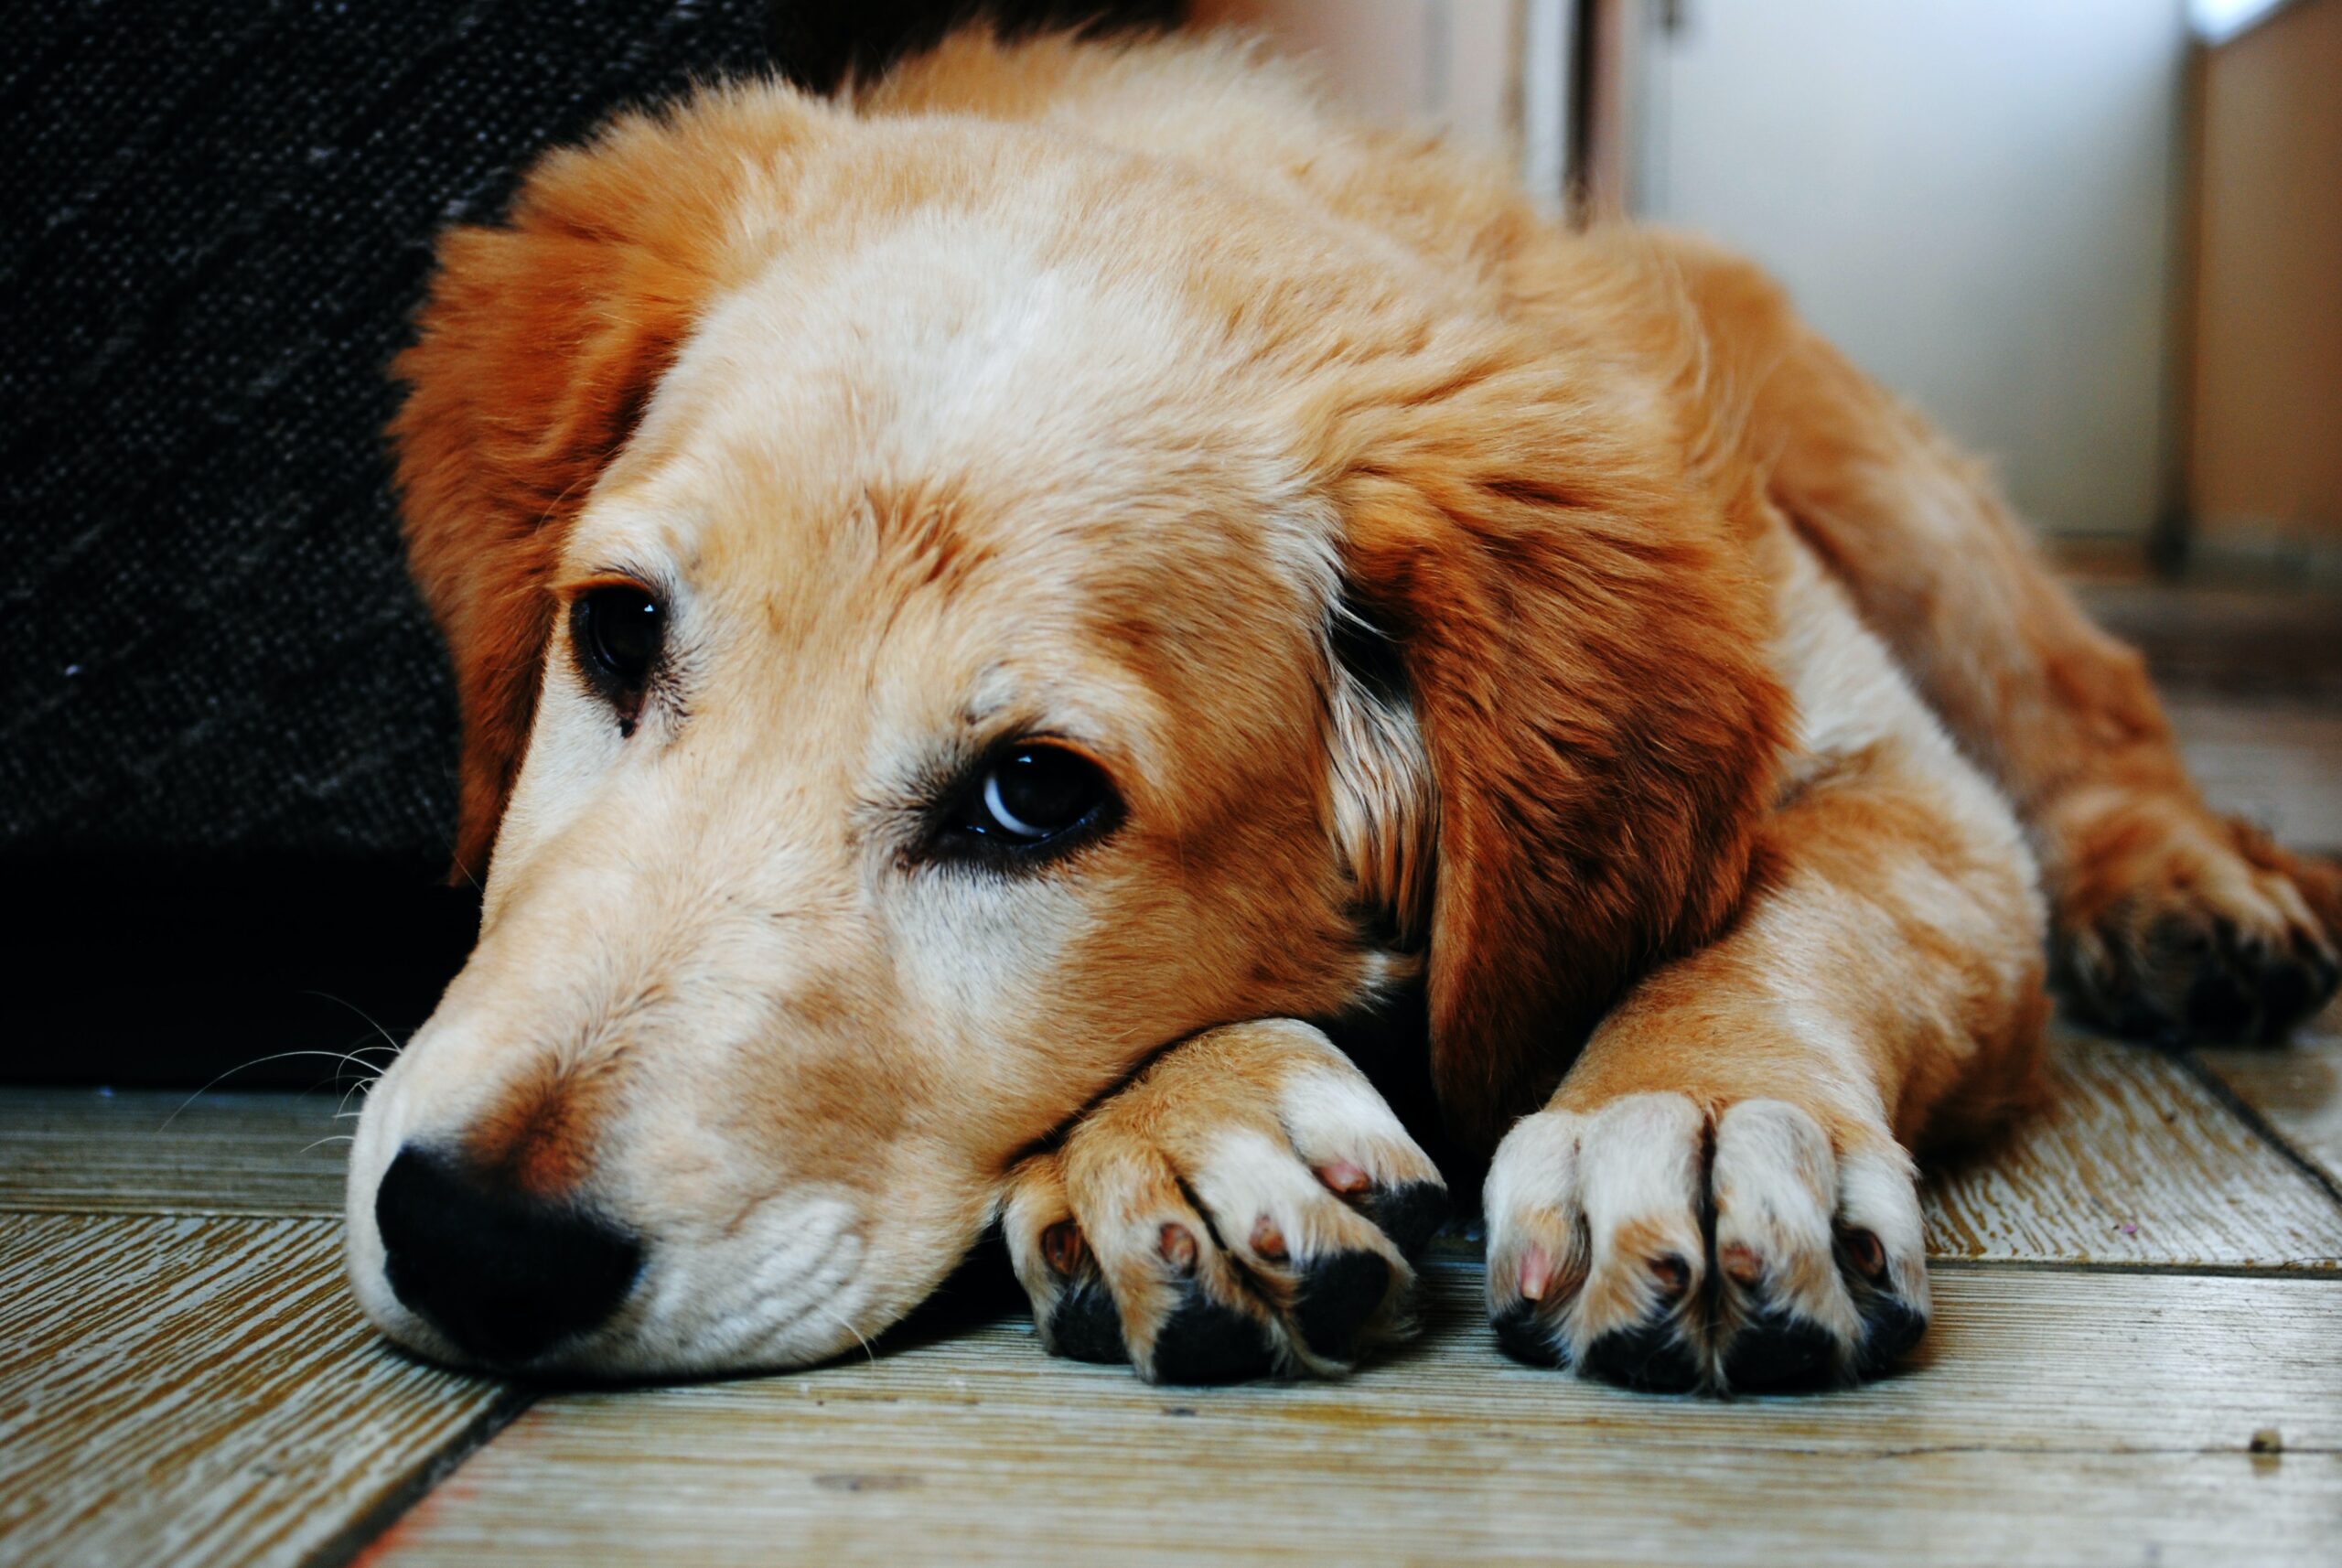 Raw Hides Can Make your Dog Sick